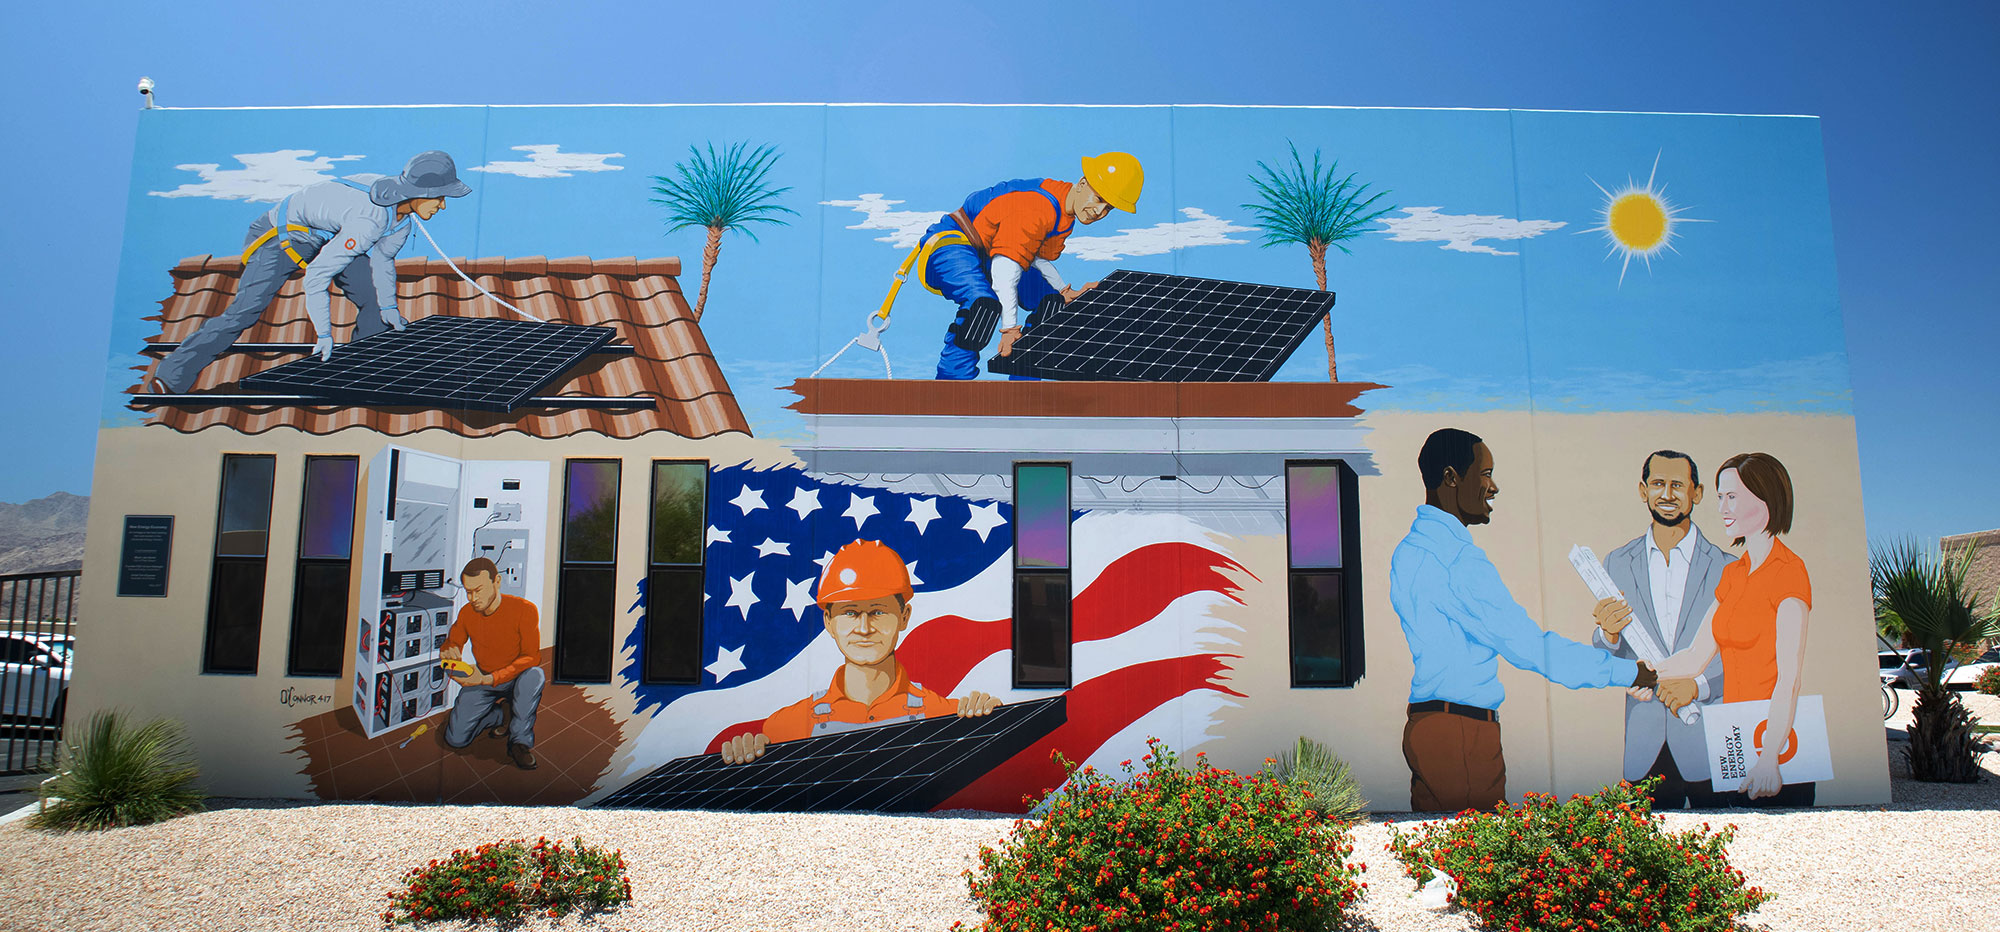 Building painted on the front with a blue sky, some white clouds two palm trees. Also painted on the front of the building is an American flag with one man with a hardhat on holding a solar panel in his hands, 2 men working on the roof installing solar panels. One plane guy facing a man and a woman. The man has development plans in his hand, and the woman has a folder in her arms. There is dirt in front of the building and three bushes for landscaping.